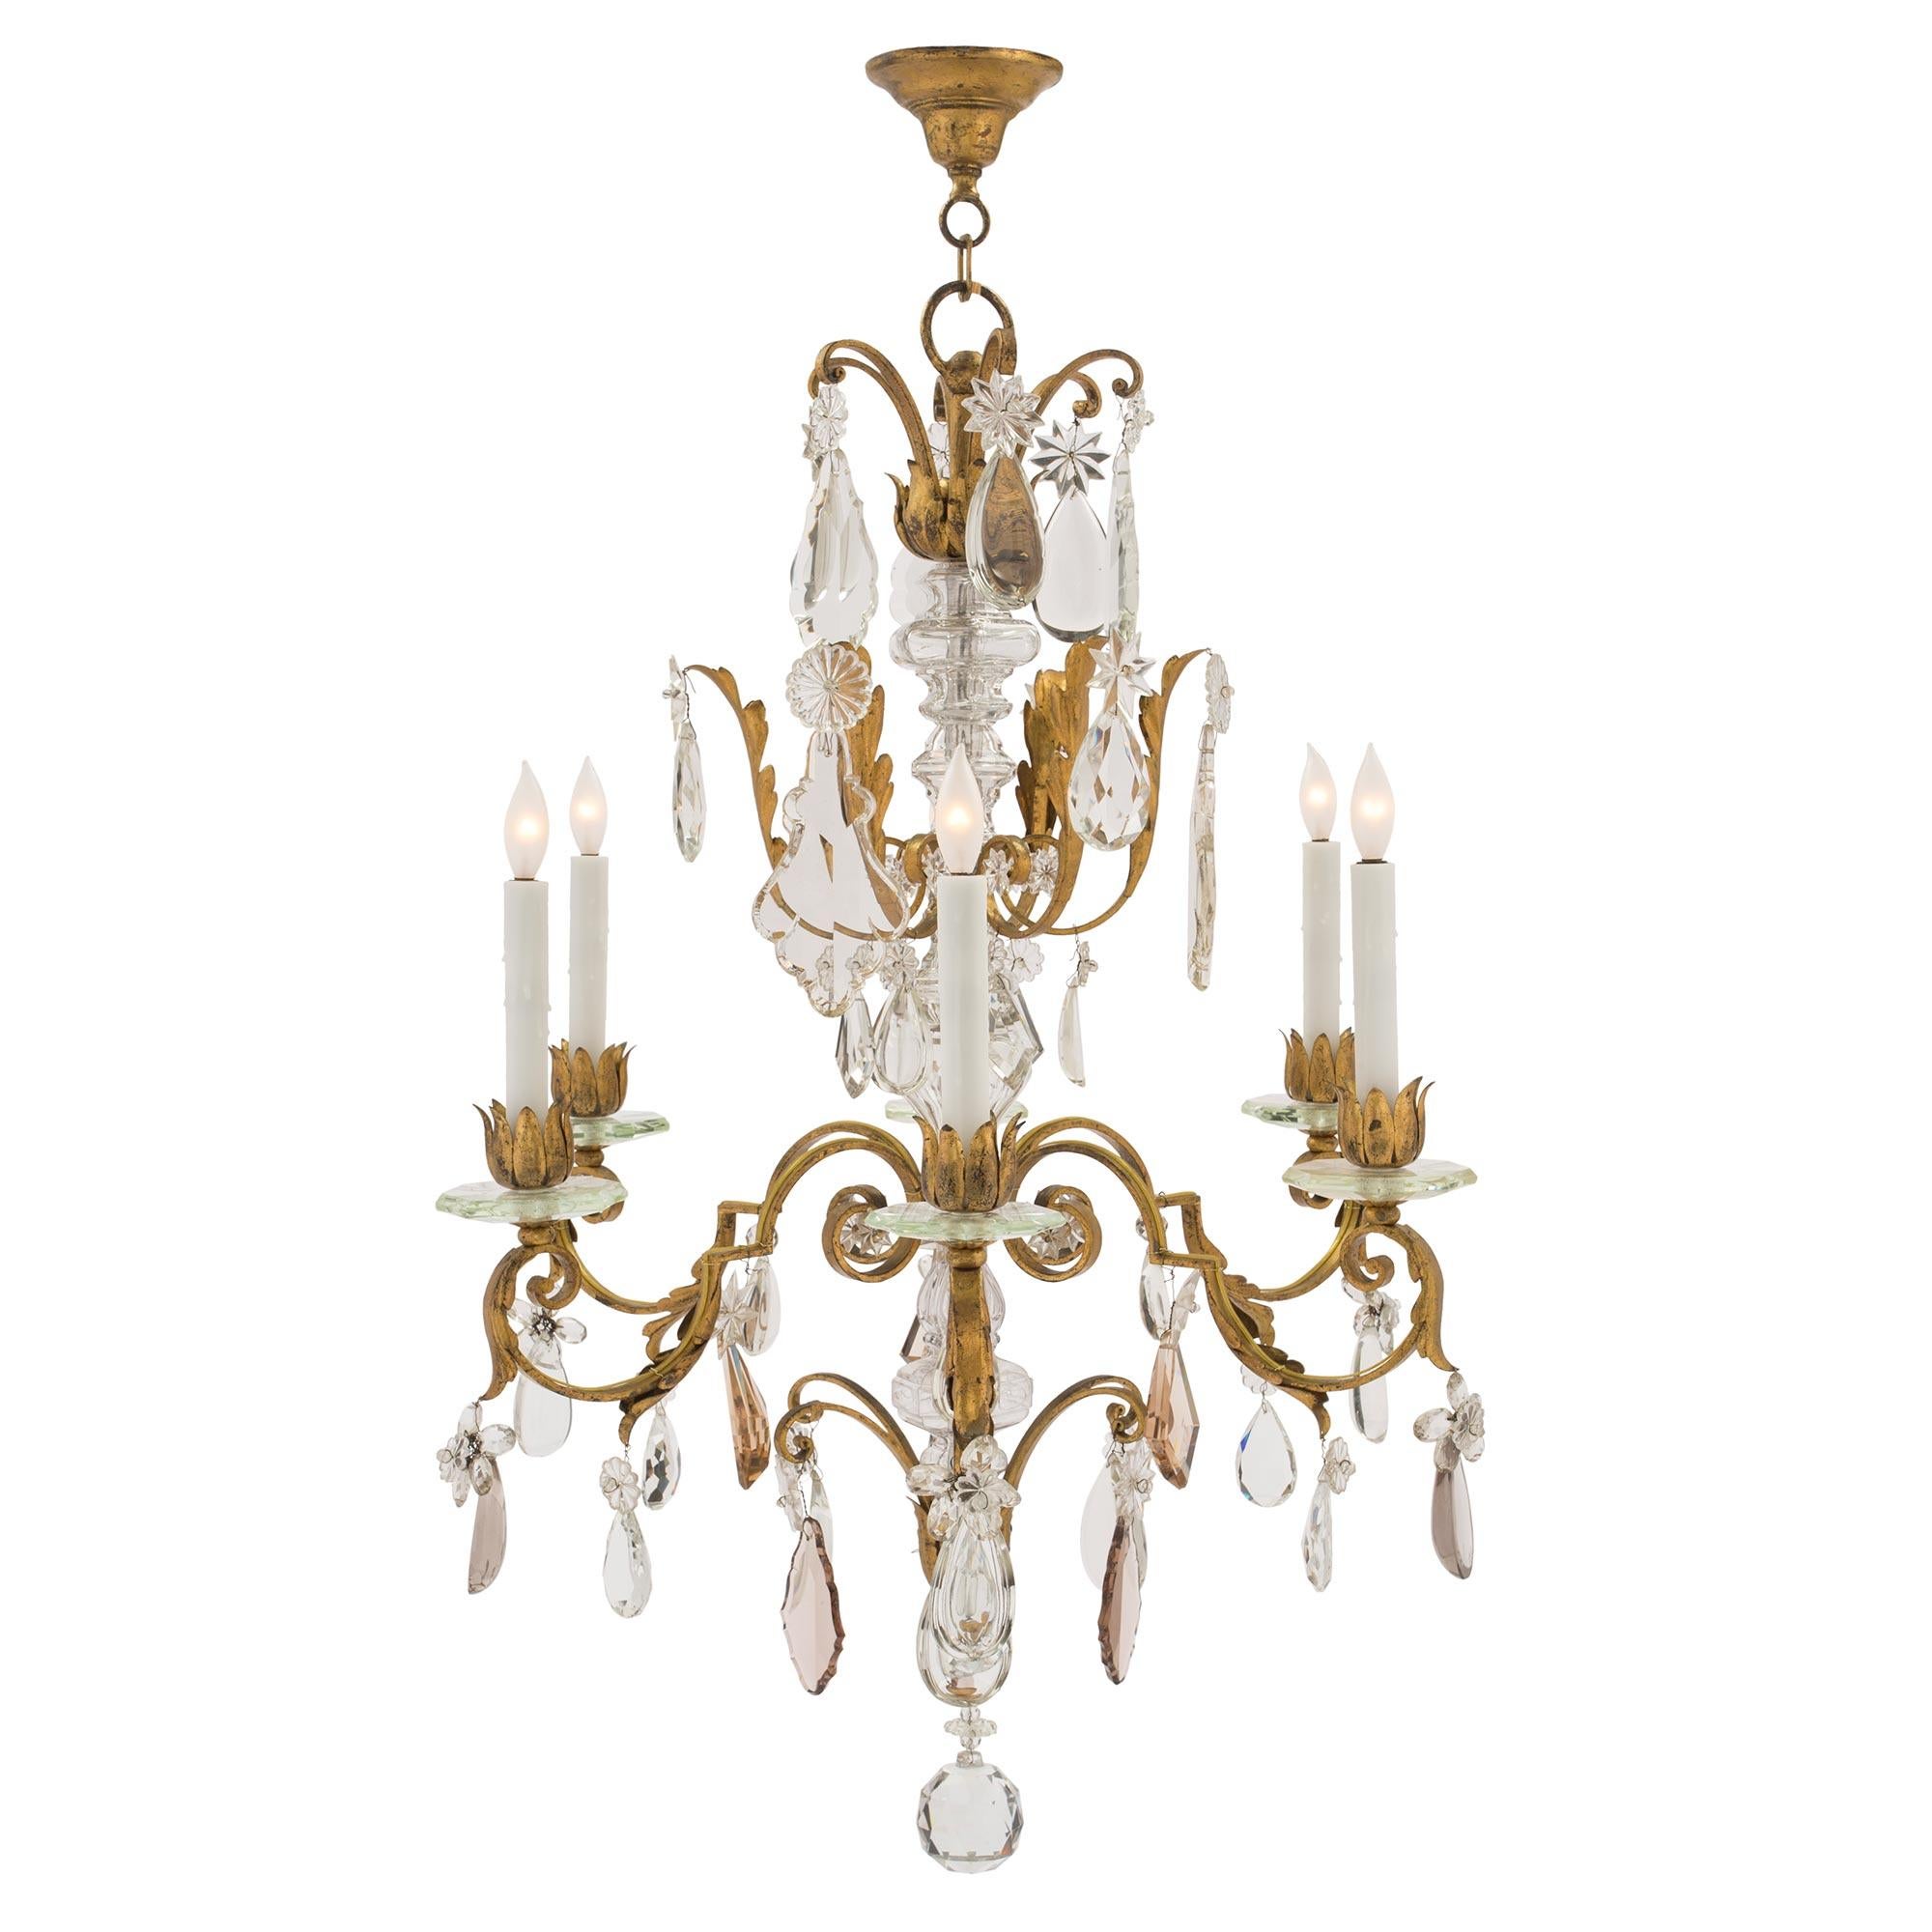 A wonderful continental early 19th century Louis XV st. gilt iron, crystal, six light manor style chandelier. The chandelier is centered by a beautiful and uniquely cut solid crystal ball below fine gilt metal leaves. Branching out from the elegant